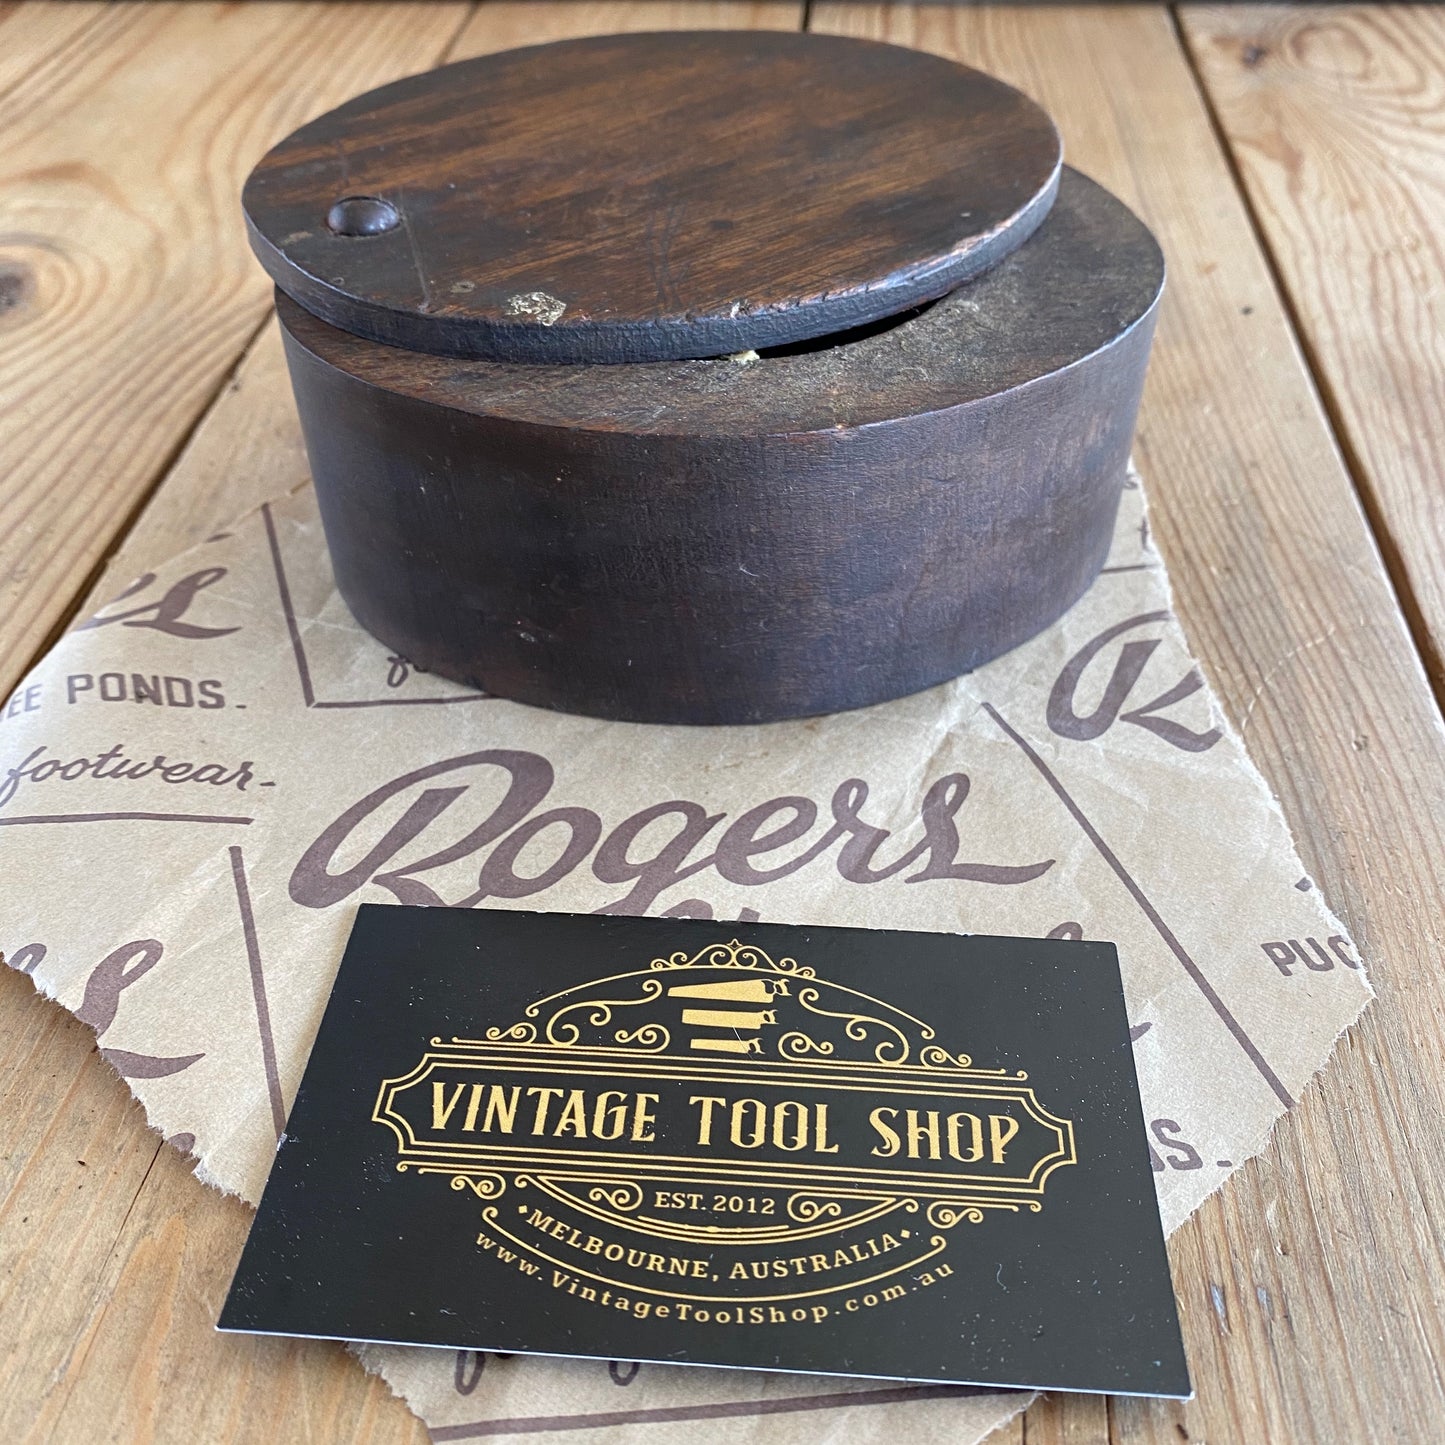 SOLD Antique London Plane Wooden GREASE BOX T4203